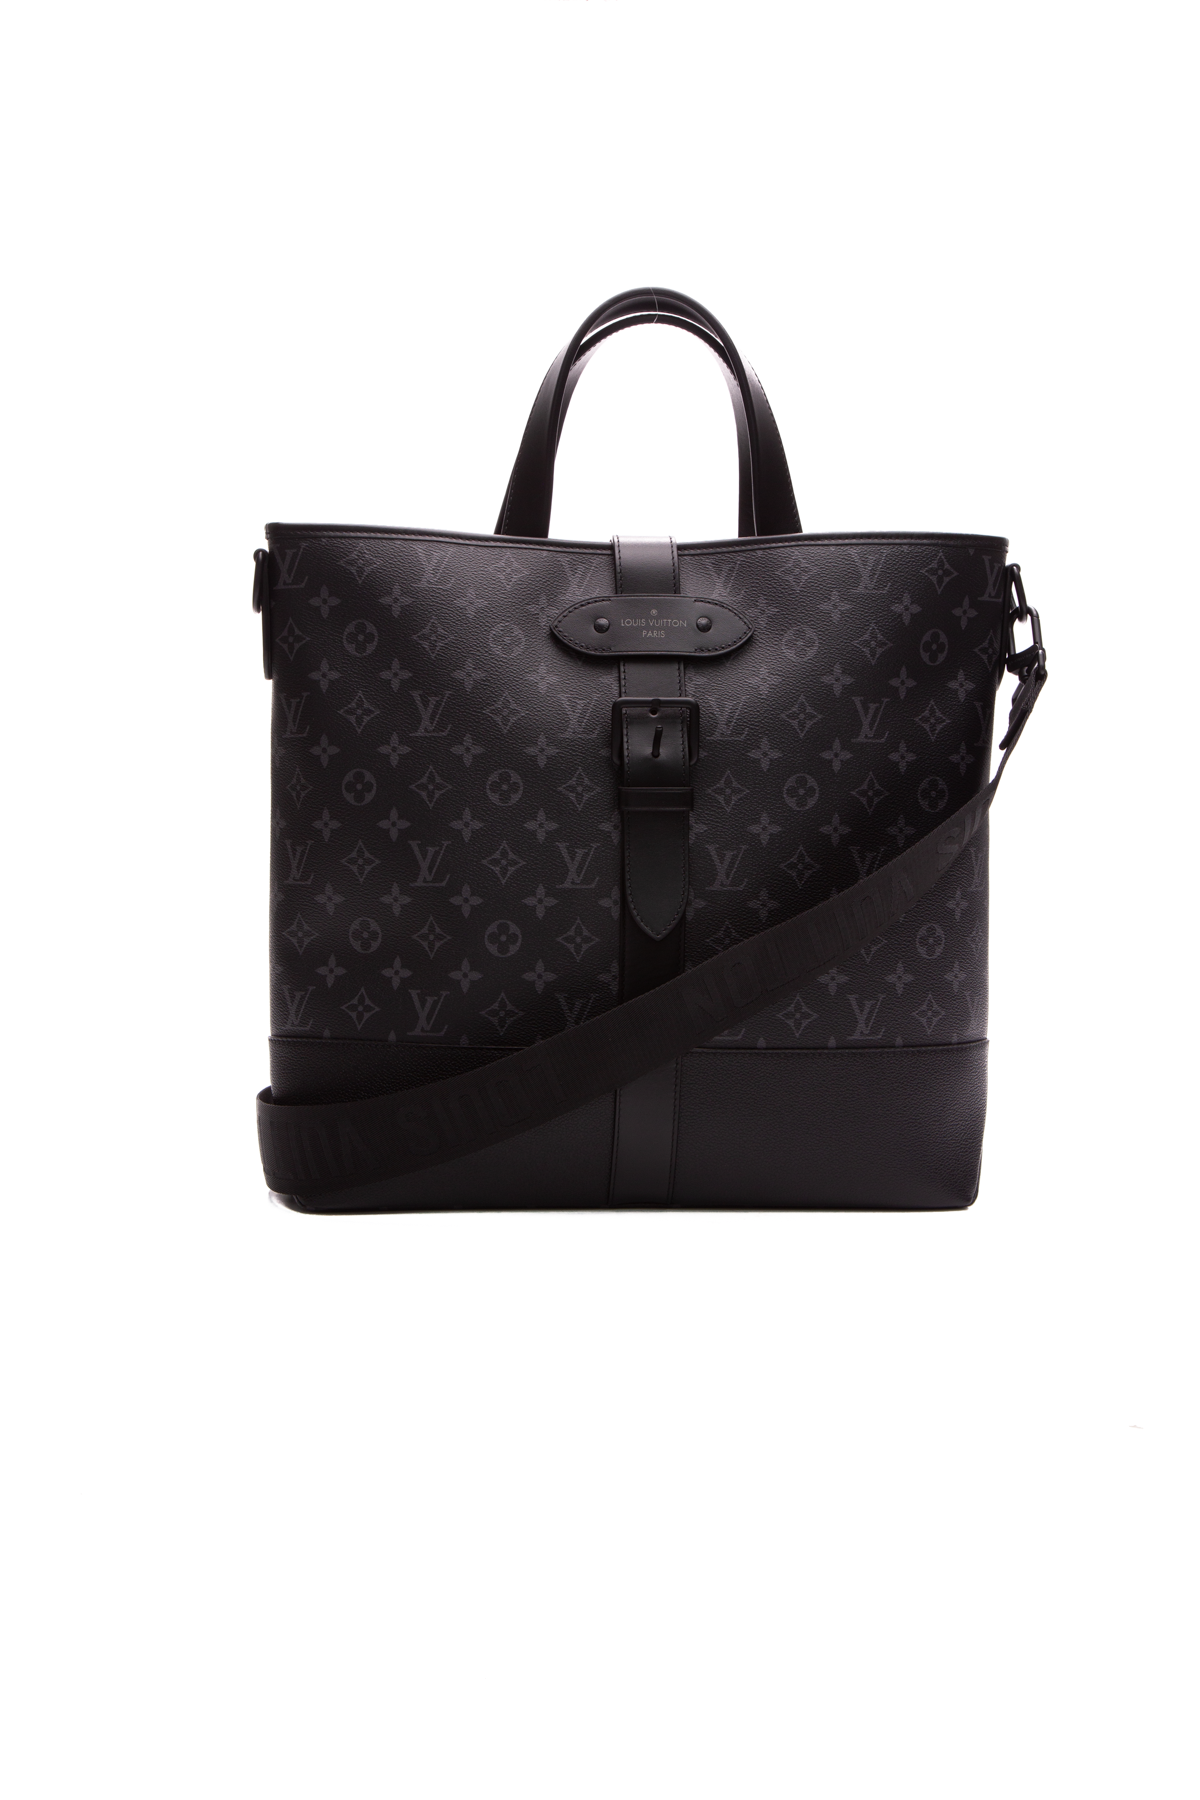 Handbagholic - Find out what the date code in your Louis Vuitton bag means  with our FREE FOREVER date code checker 👊. ⁠ ⁠ 1 > Click HERE >